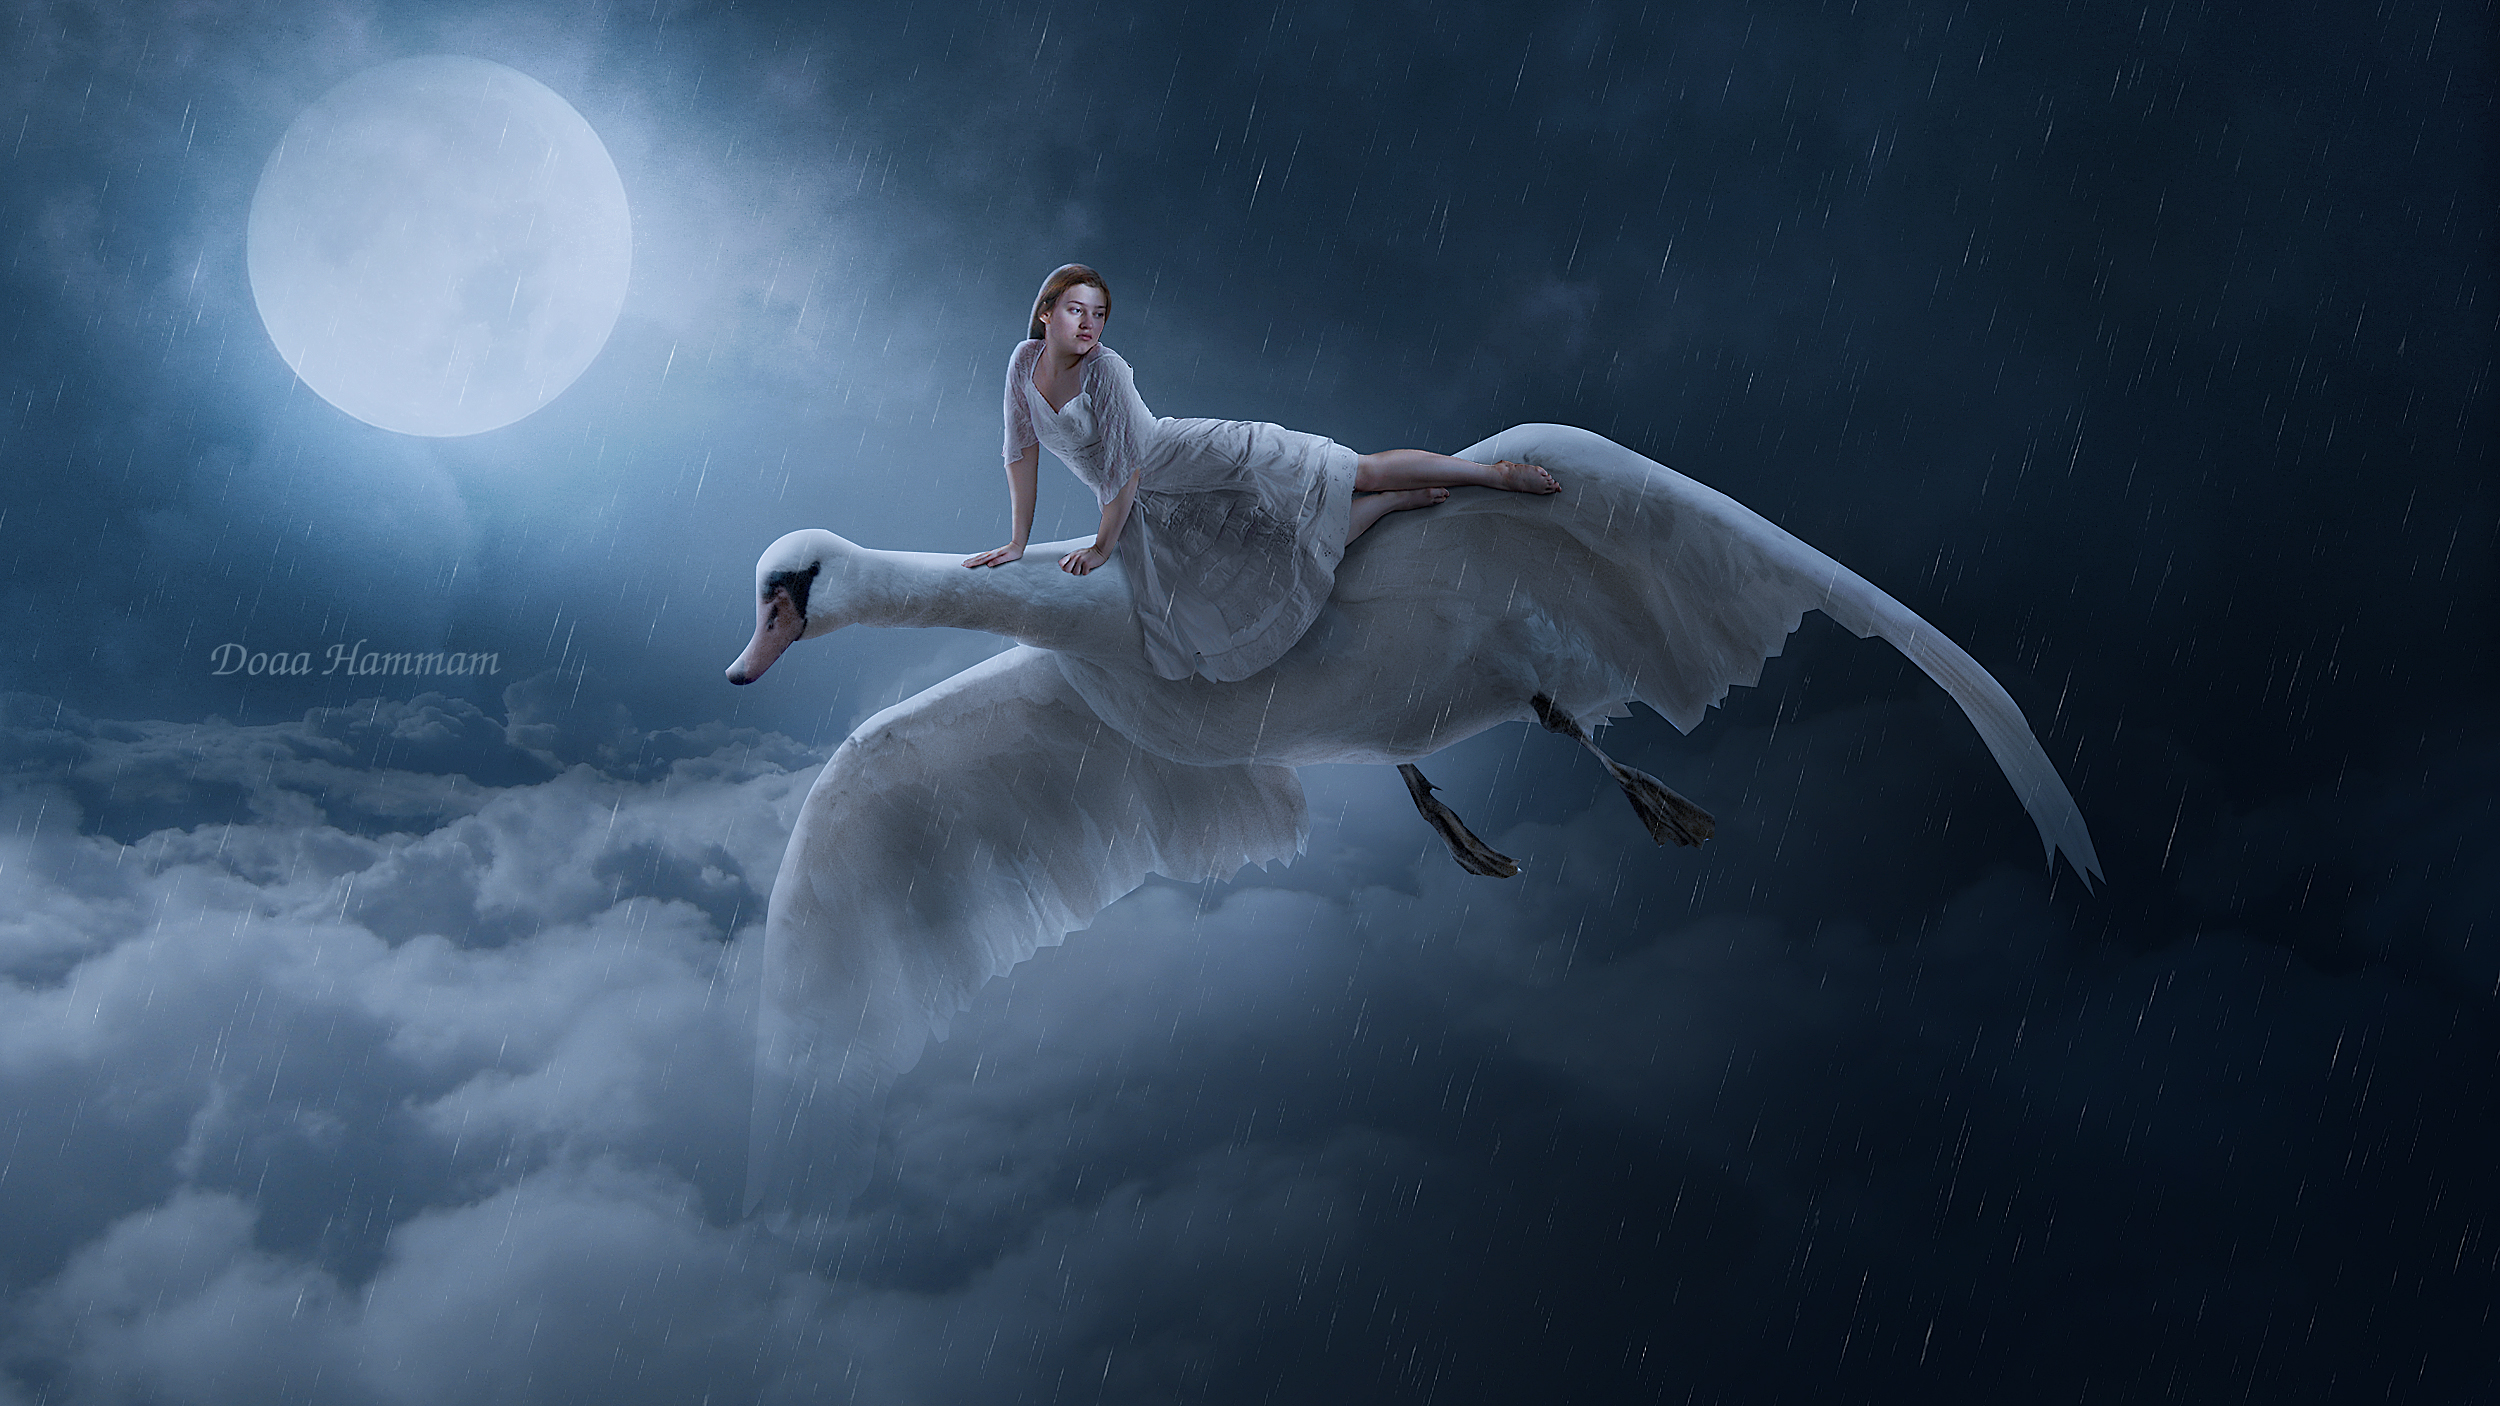 Girl on Magical Flying Swan on a Full Moon Night by Doaa Hammam